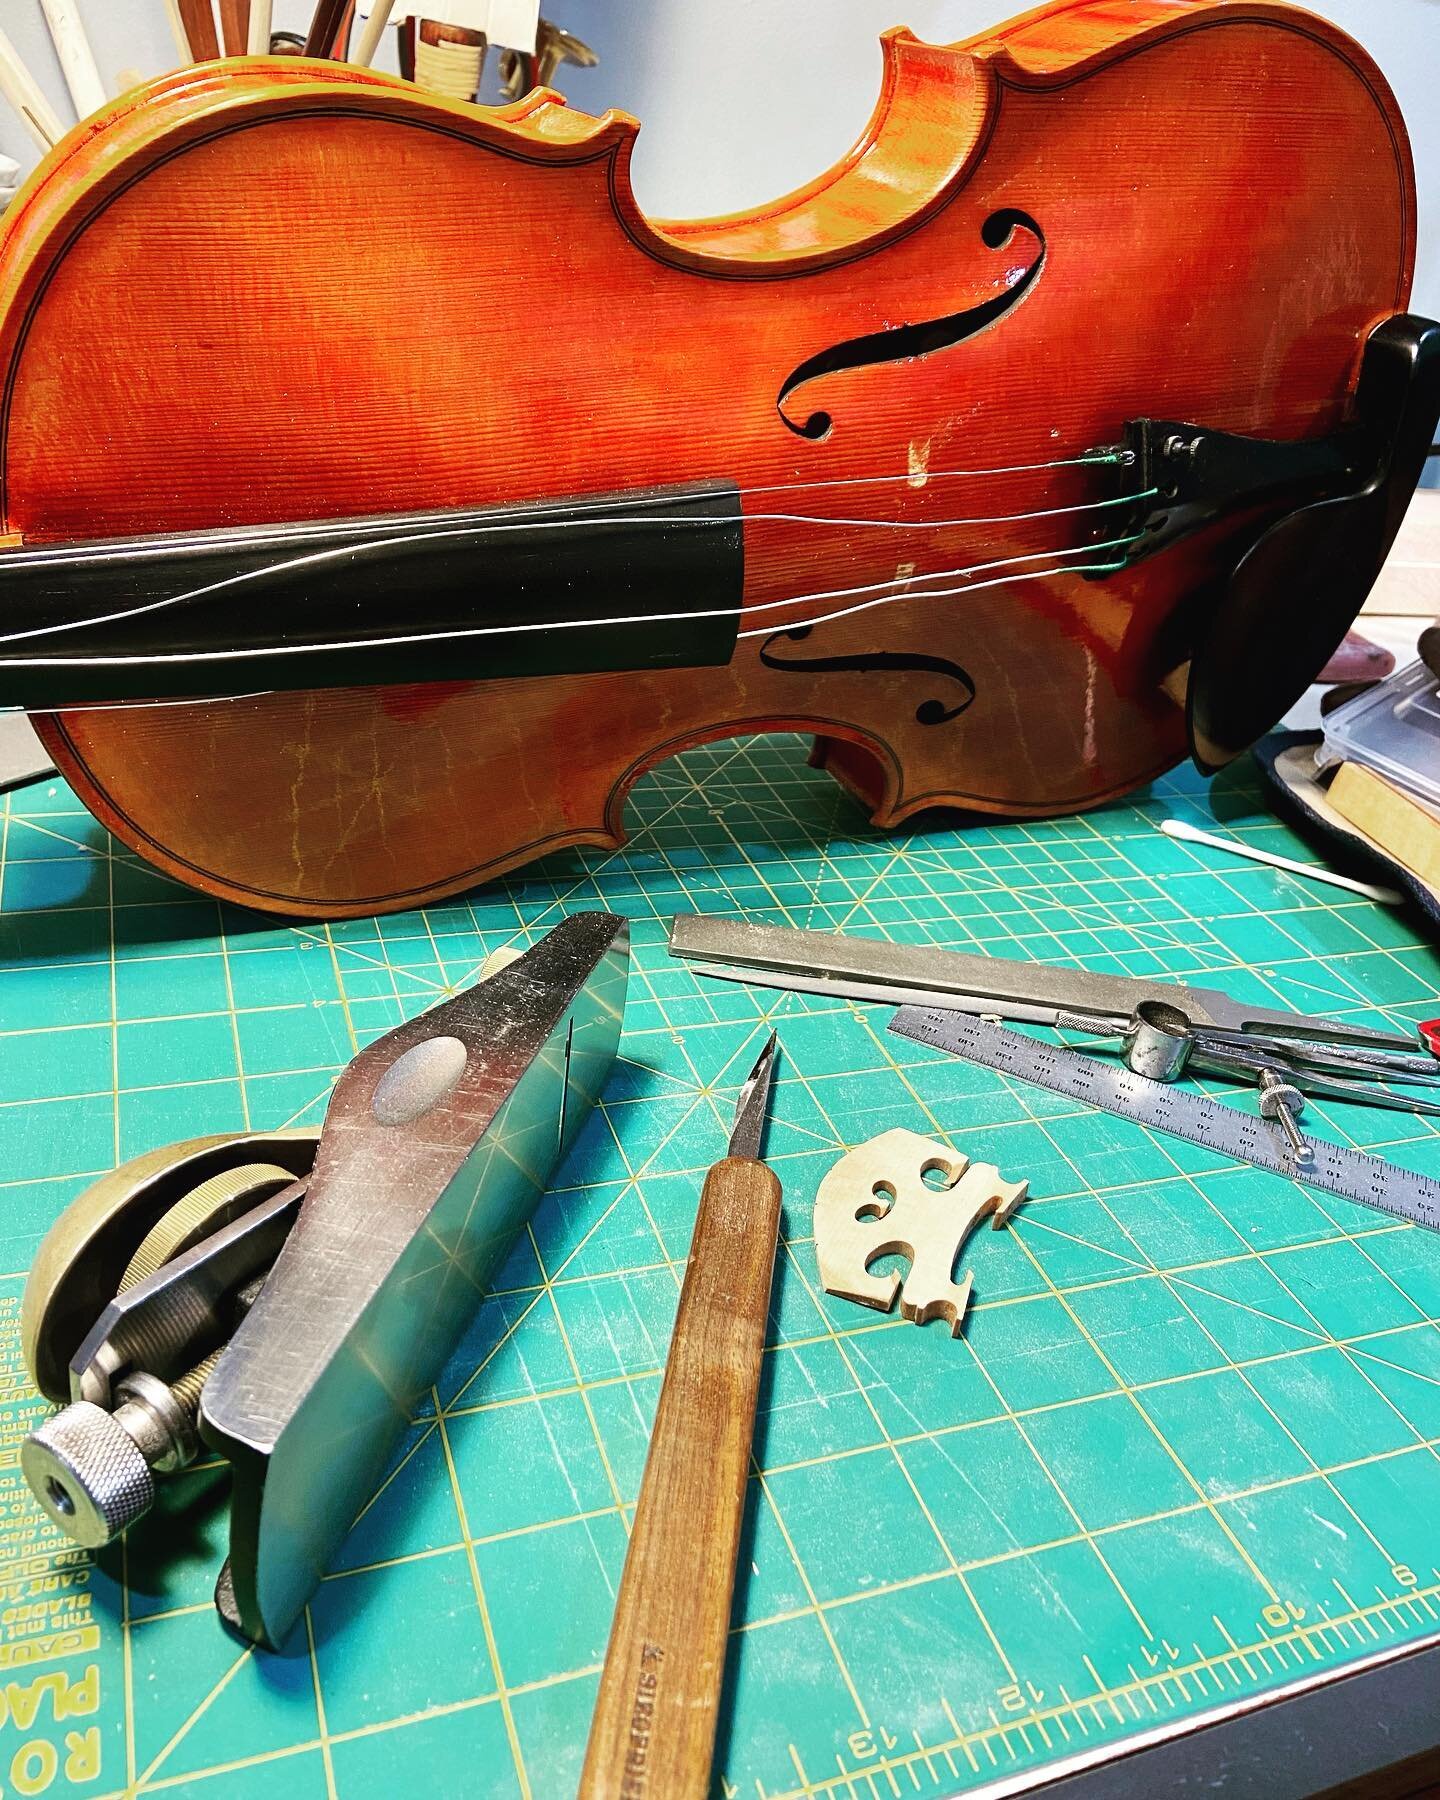 A few adjustments needed for this viola before it heads up to @vermontviolins for the Celebrating Women Luthiers exhibit!  This quirky animal will be joining my cello for the last leg of the exhibit. Can&rsquo;t wait to see all the lovely instruments